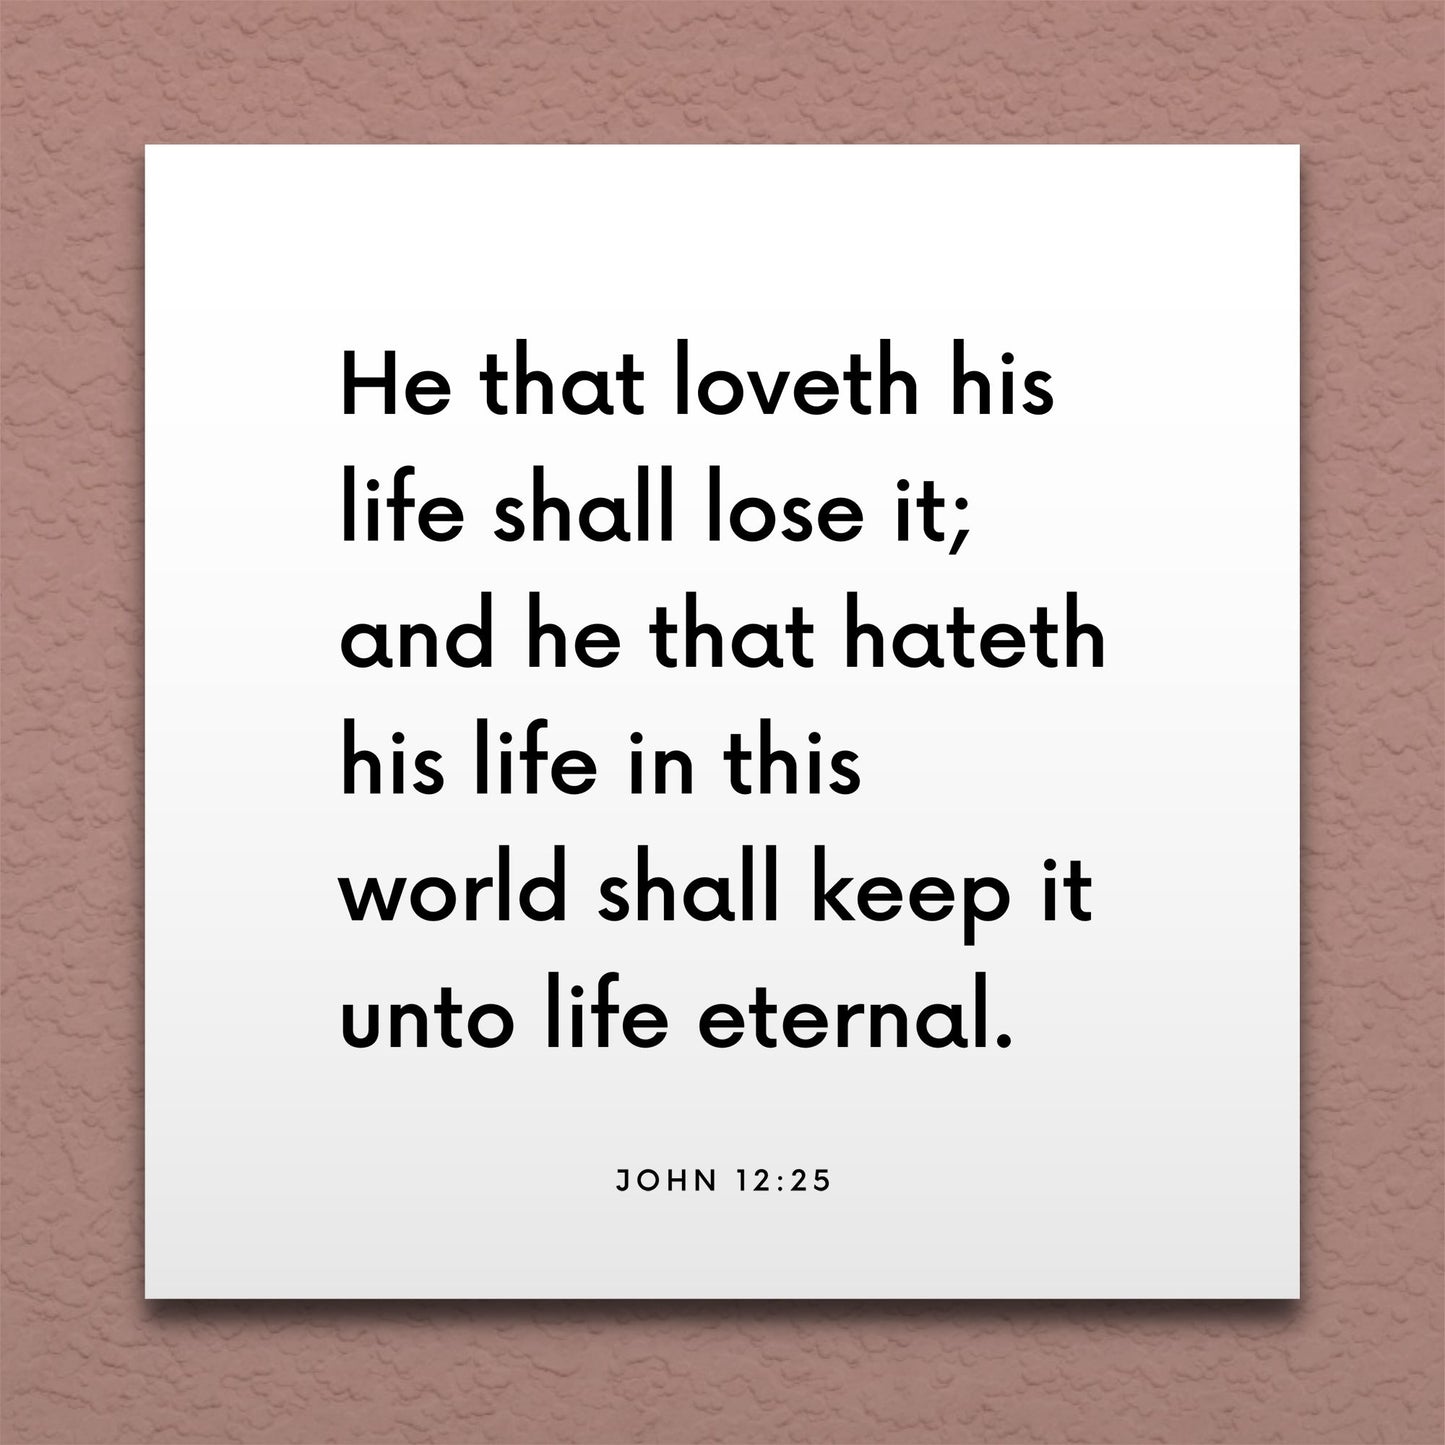 Wall-mounted scripture tile for John 12:25 - "He that loveth his life shall lose it"